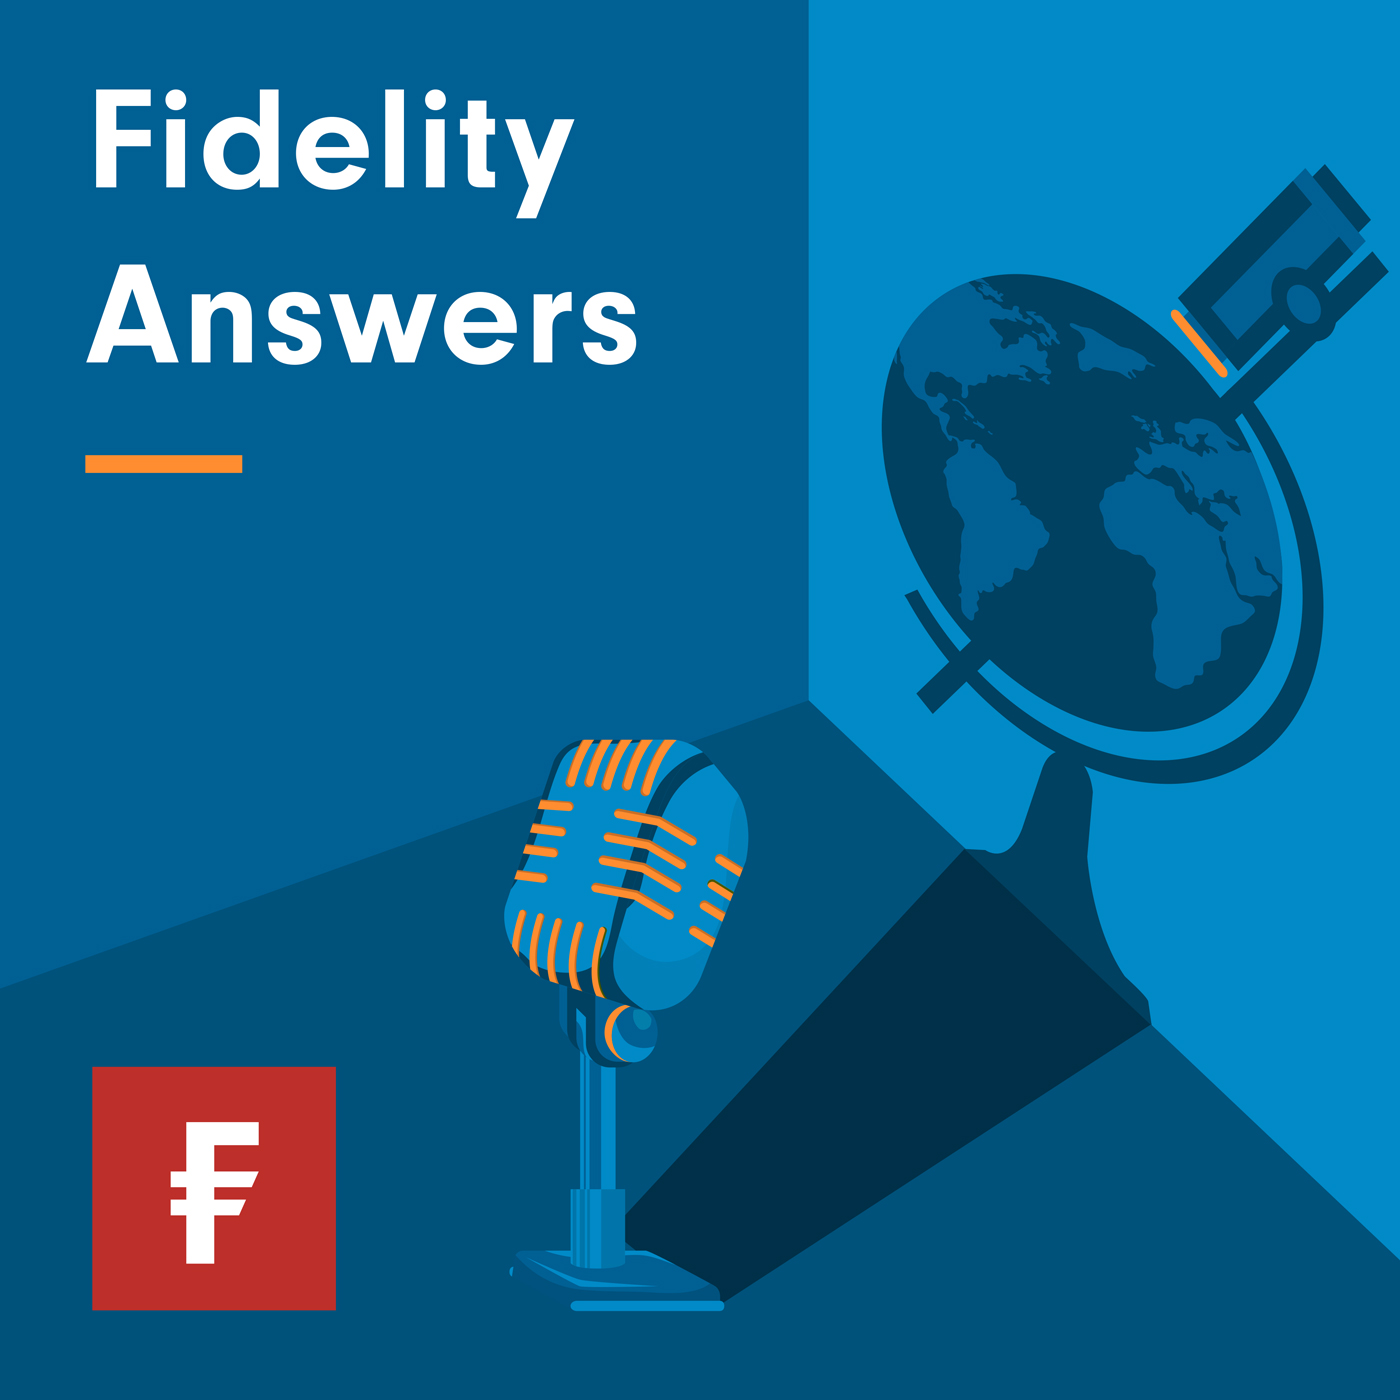 From Fidelity Answers: Coronavirus and the new reality with Fidelity's CIO Andrew McCaffery